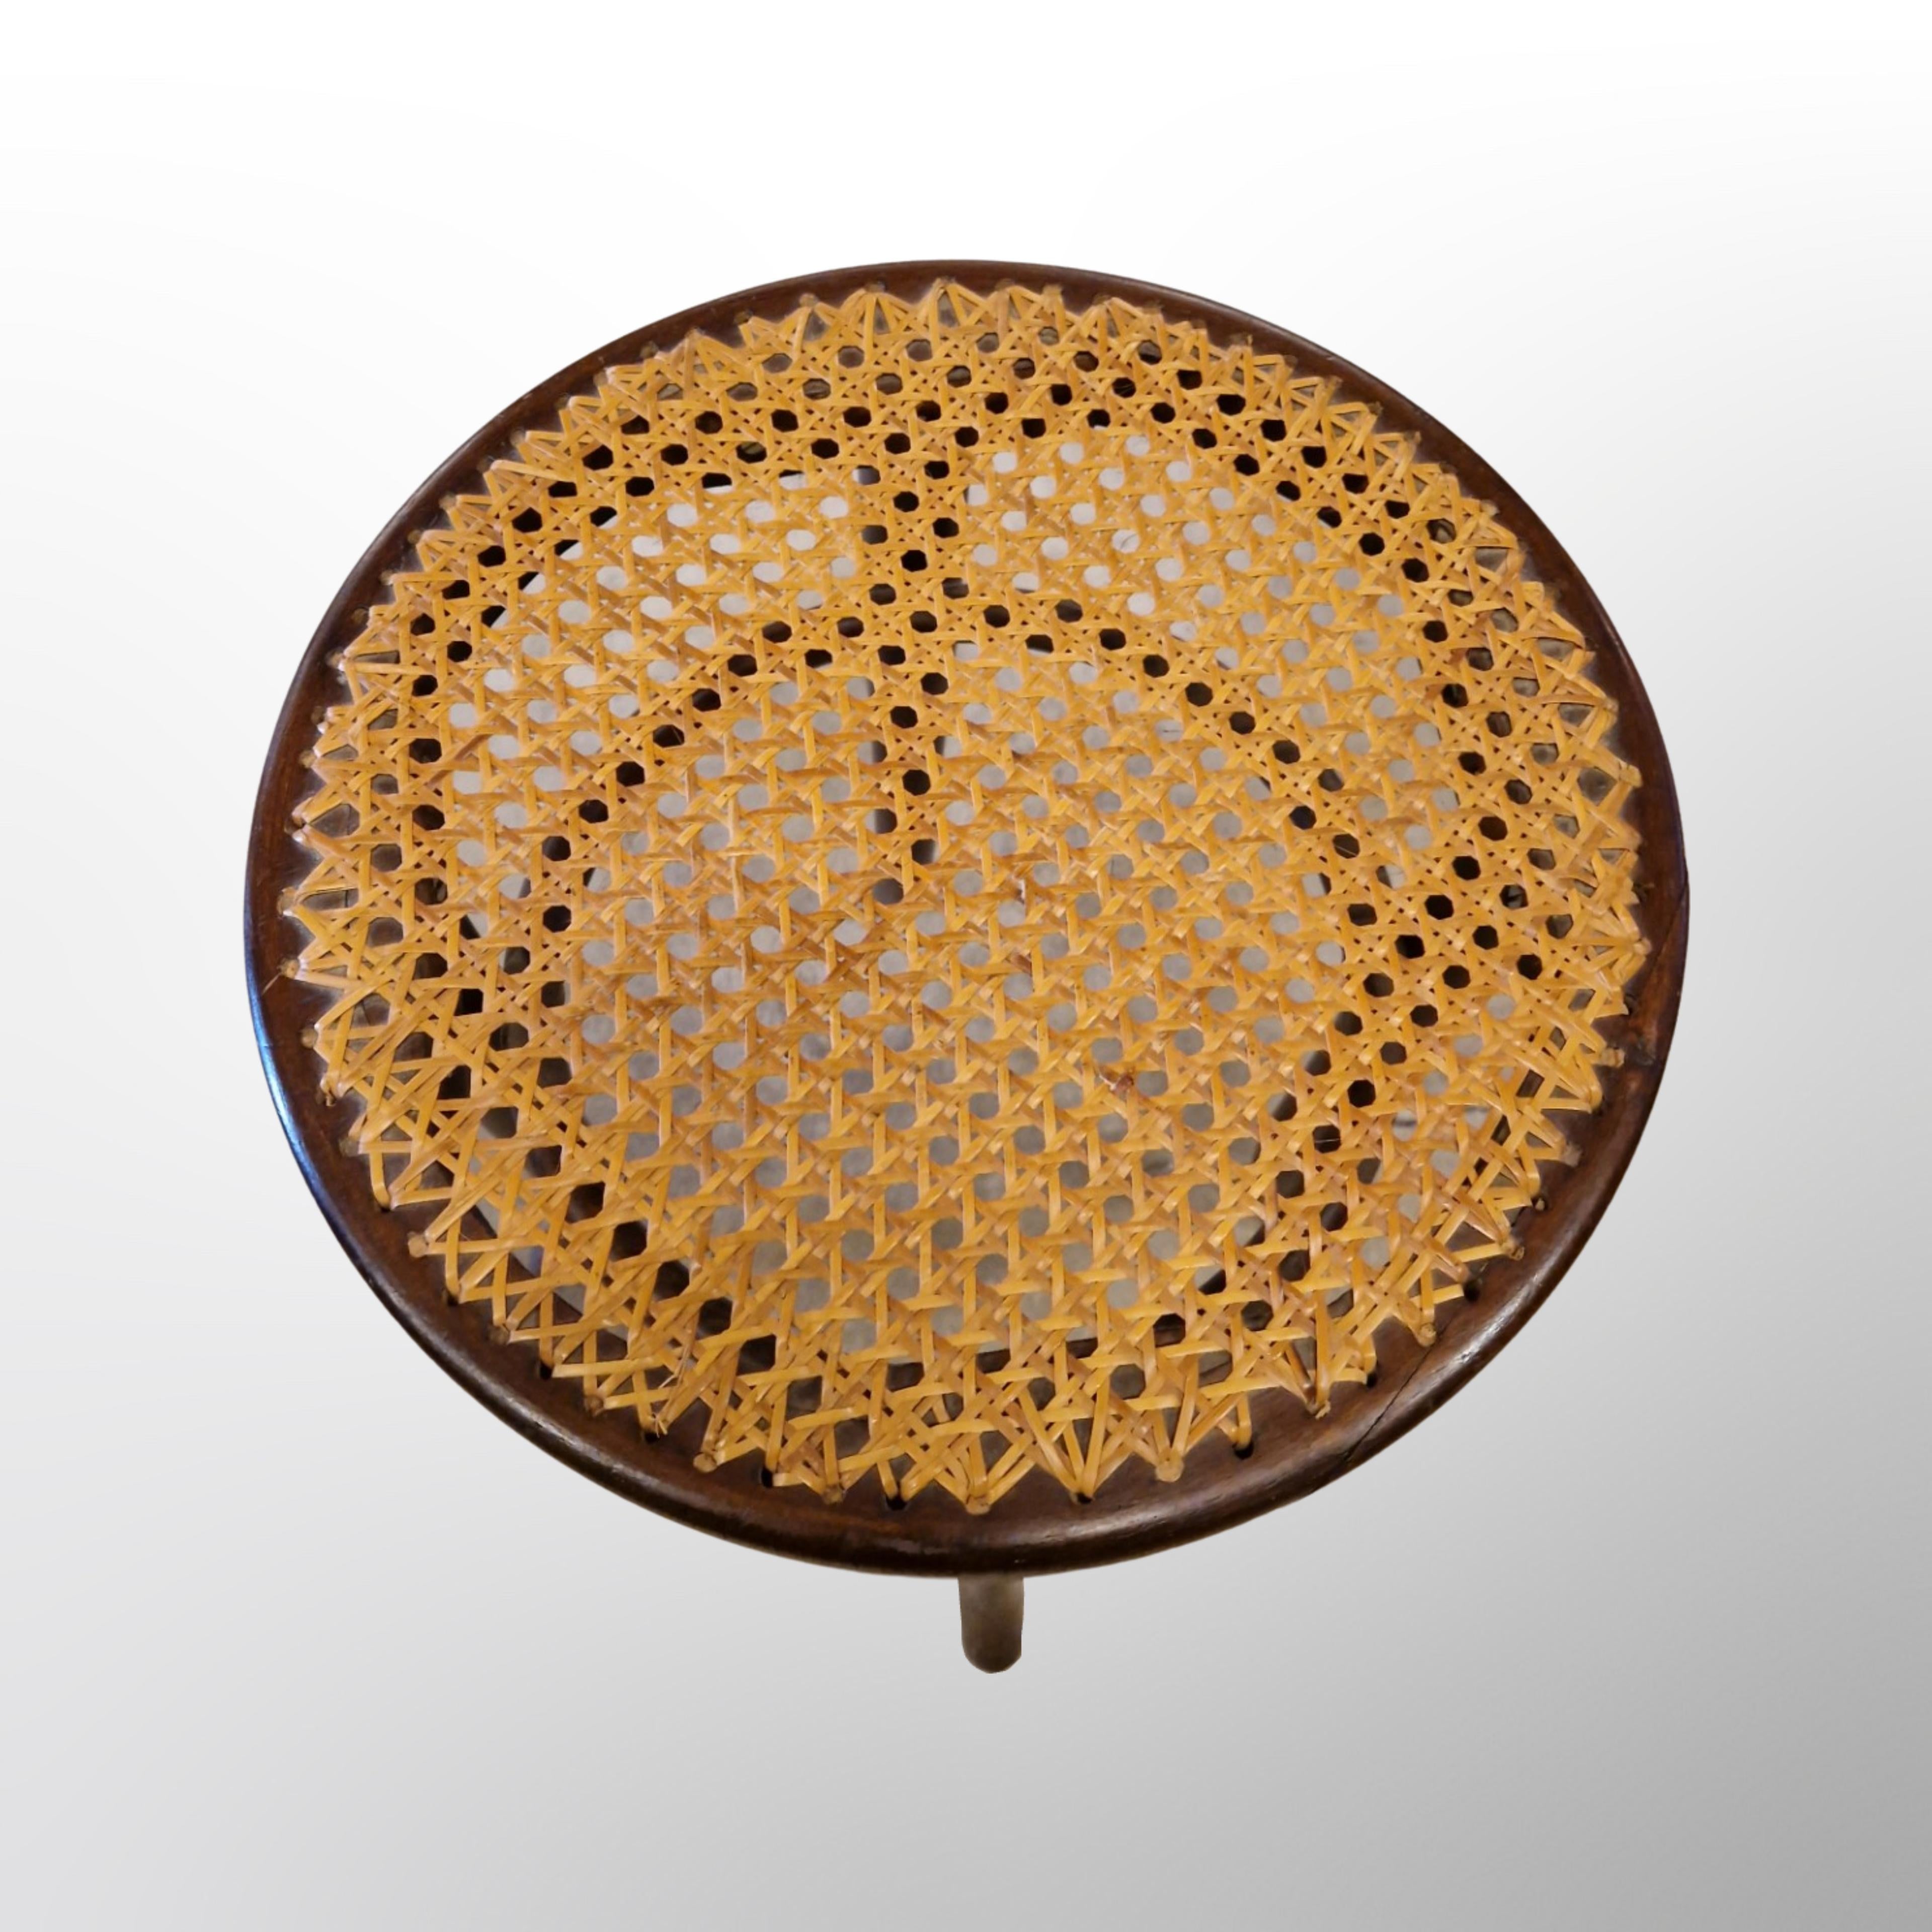 Hand-Woven Low bentwood stool with cane seat by Thonet, Austria 1920s For Sale